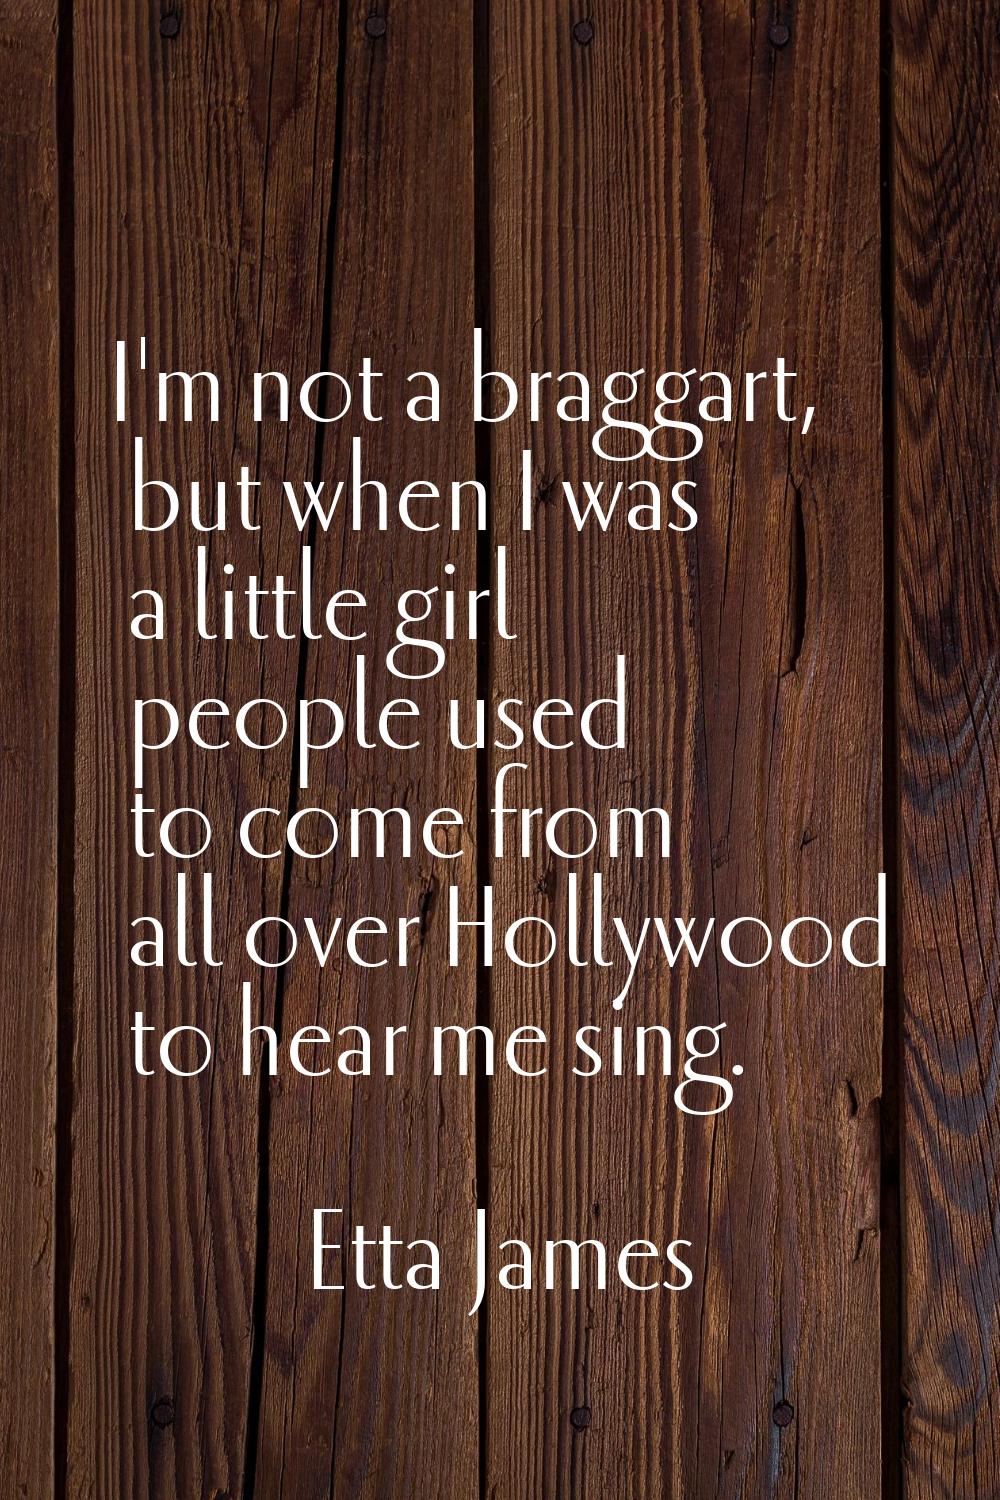 I'm not a braggart, but when I was a little girl people used to come from all over Hollywood to hea